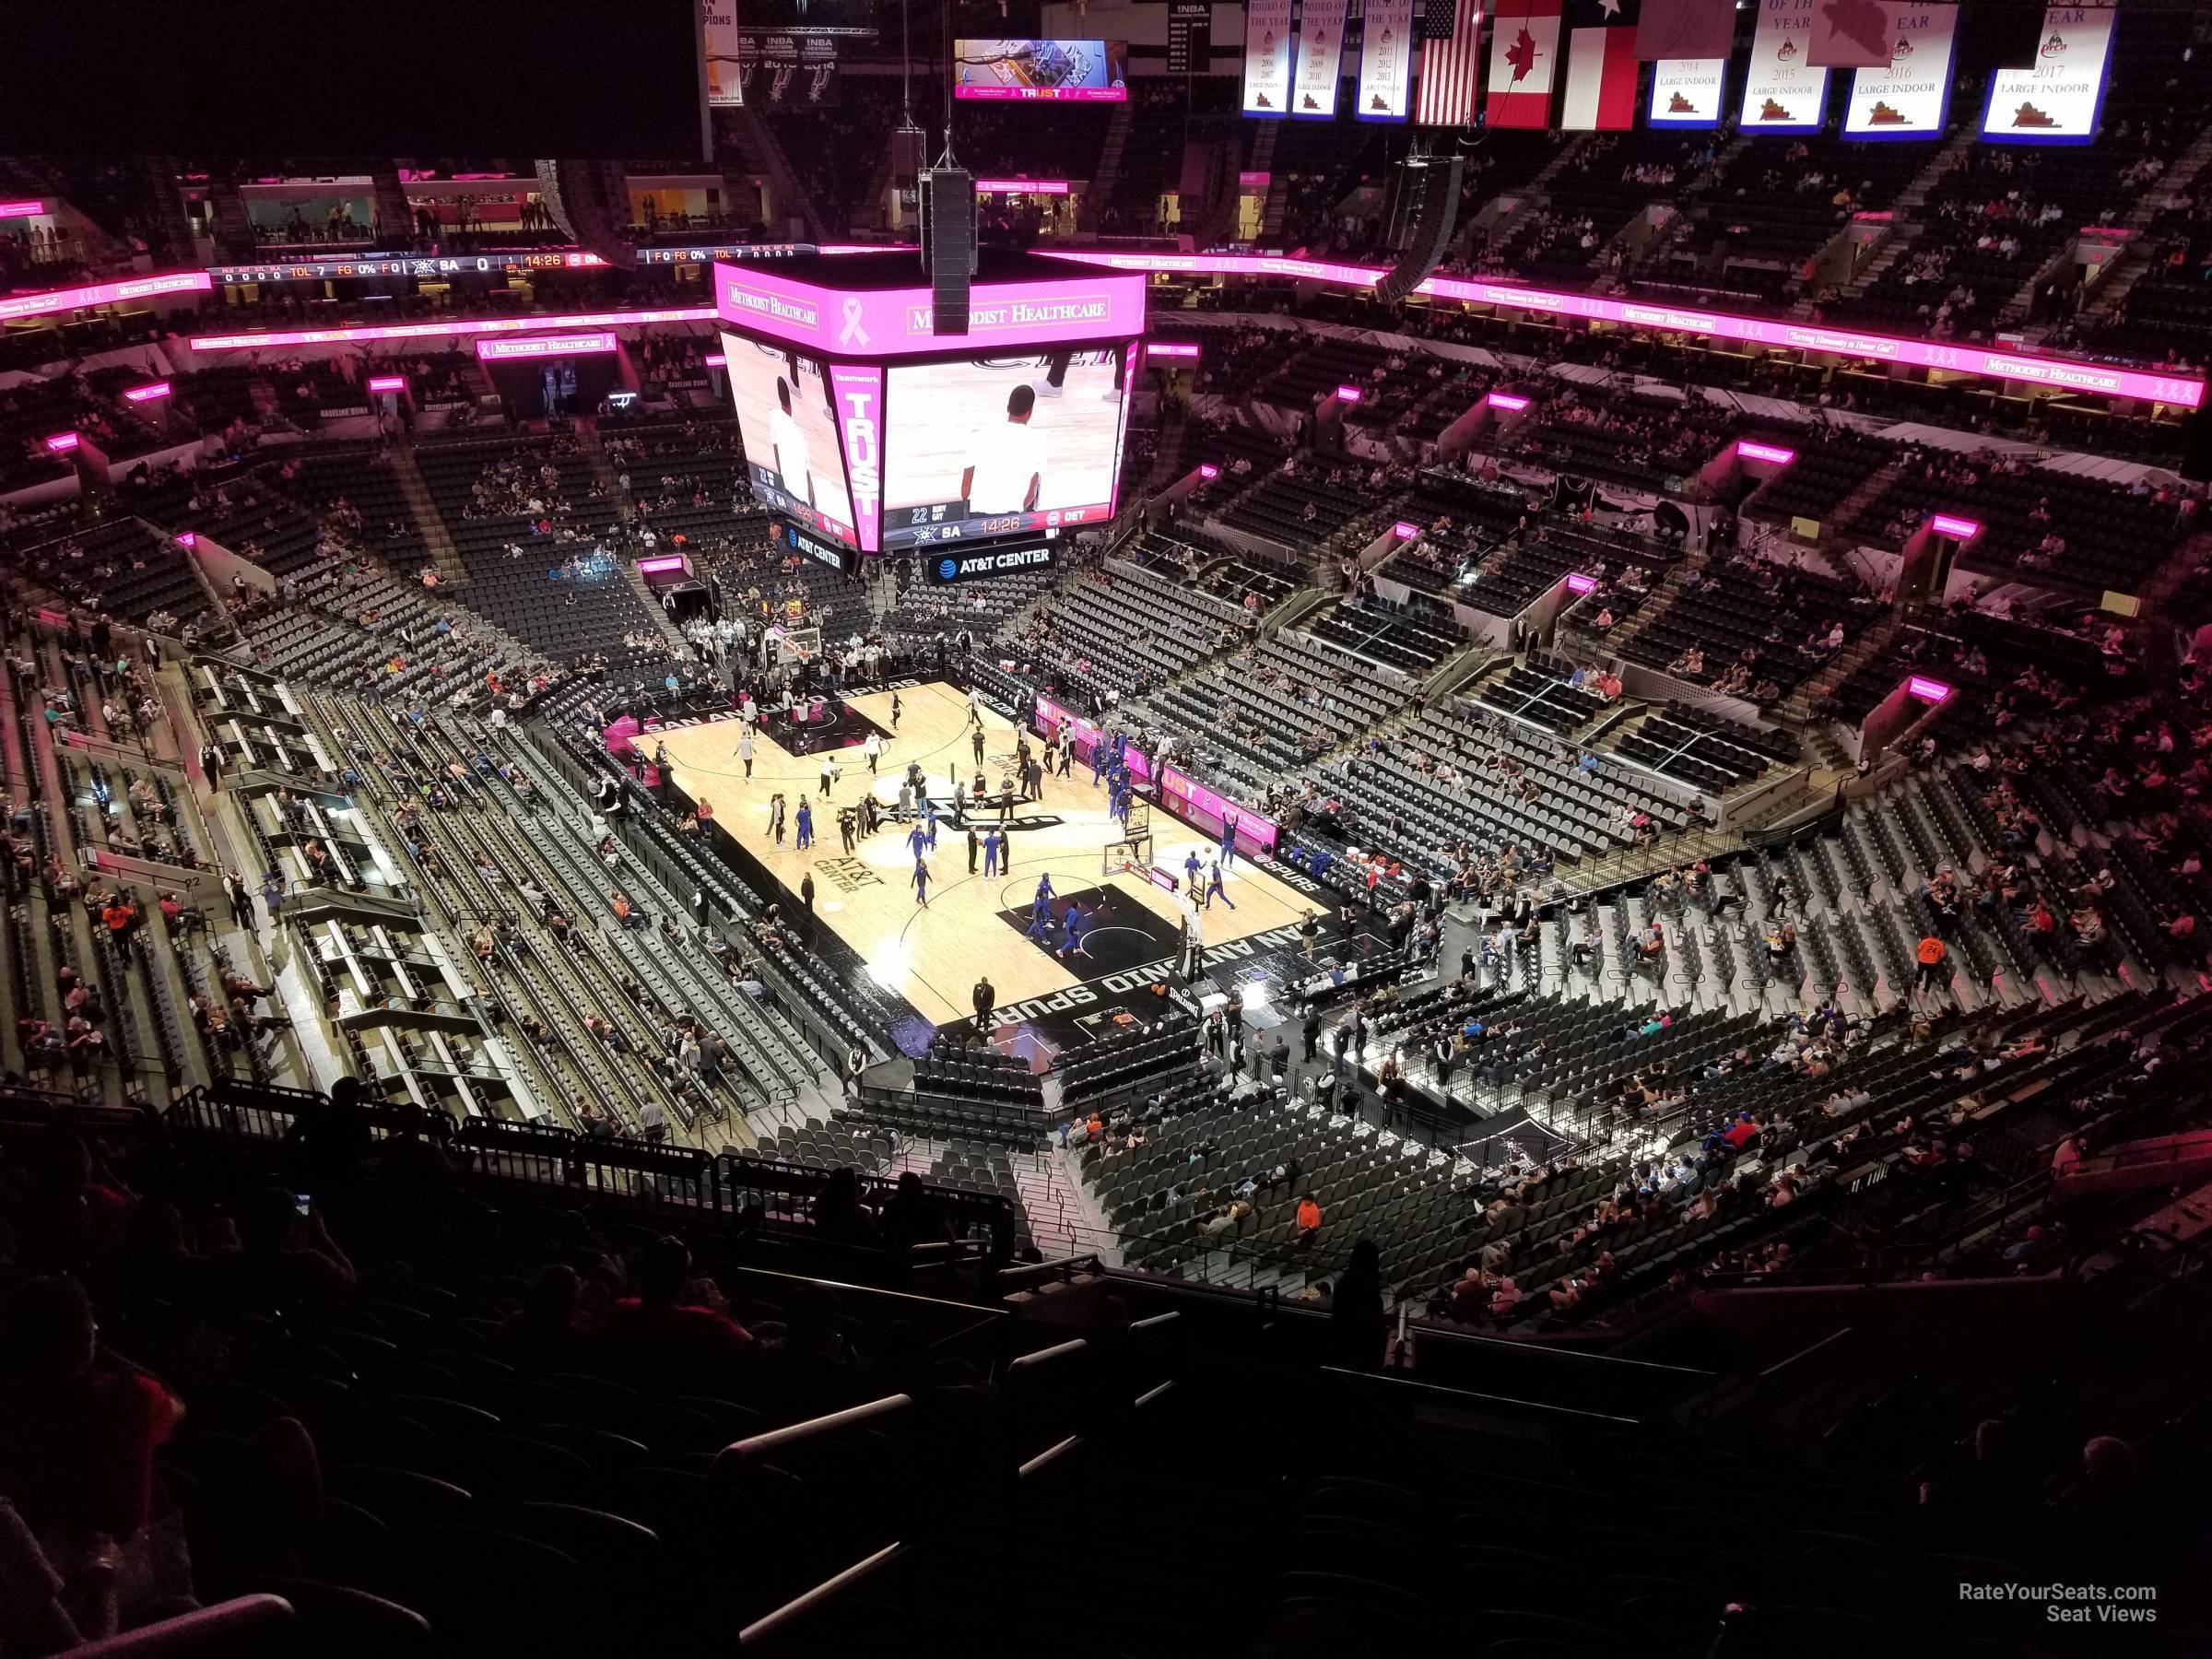 section 218, row 15 seat view  for basketball - at&t center